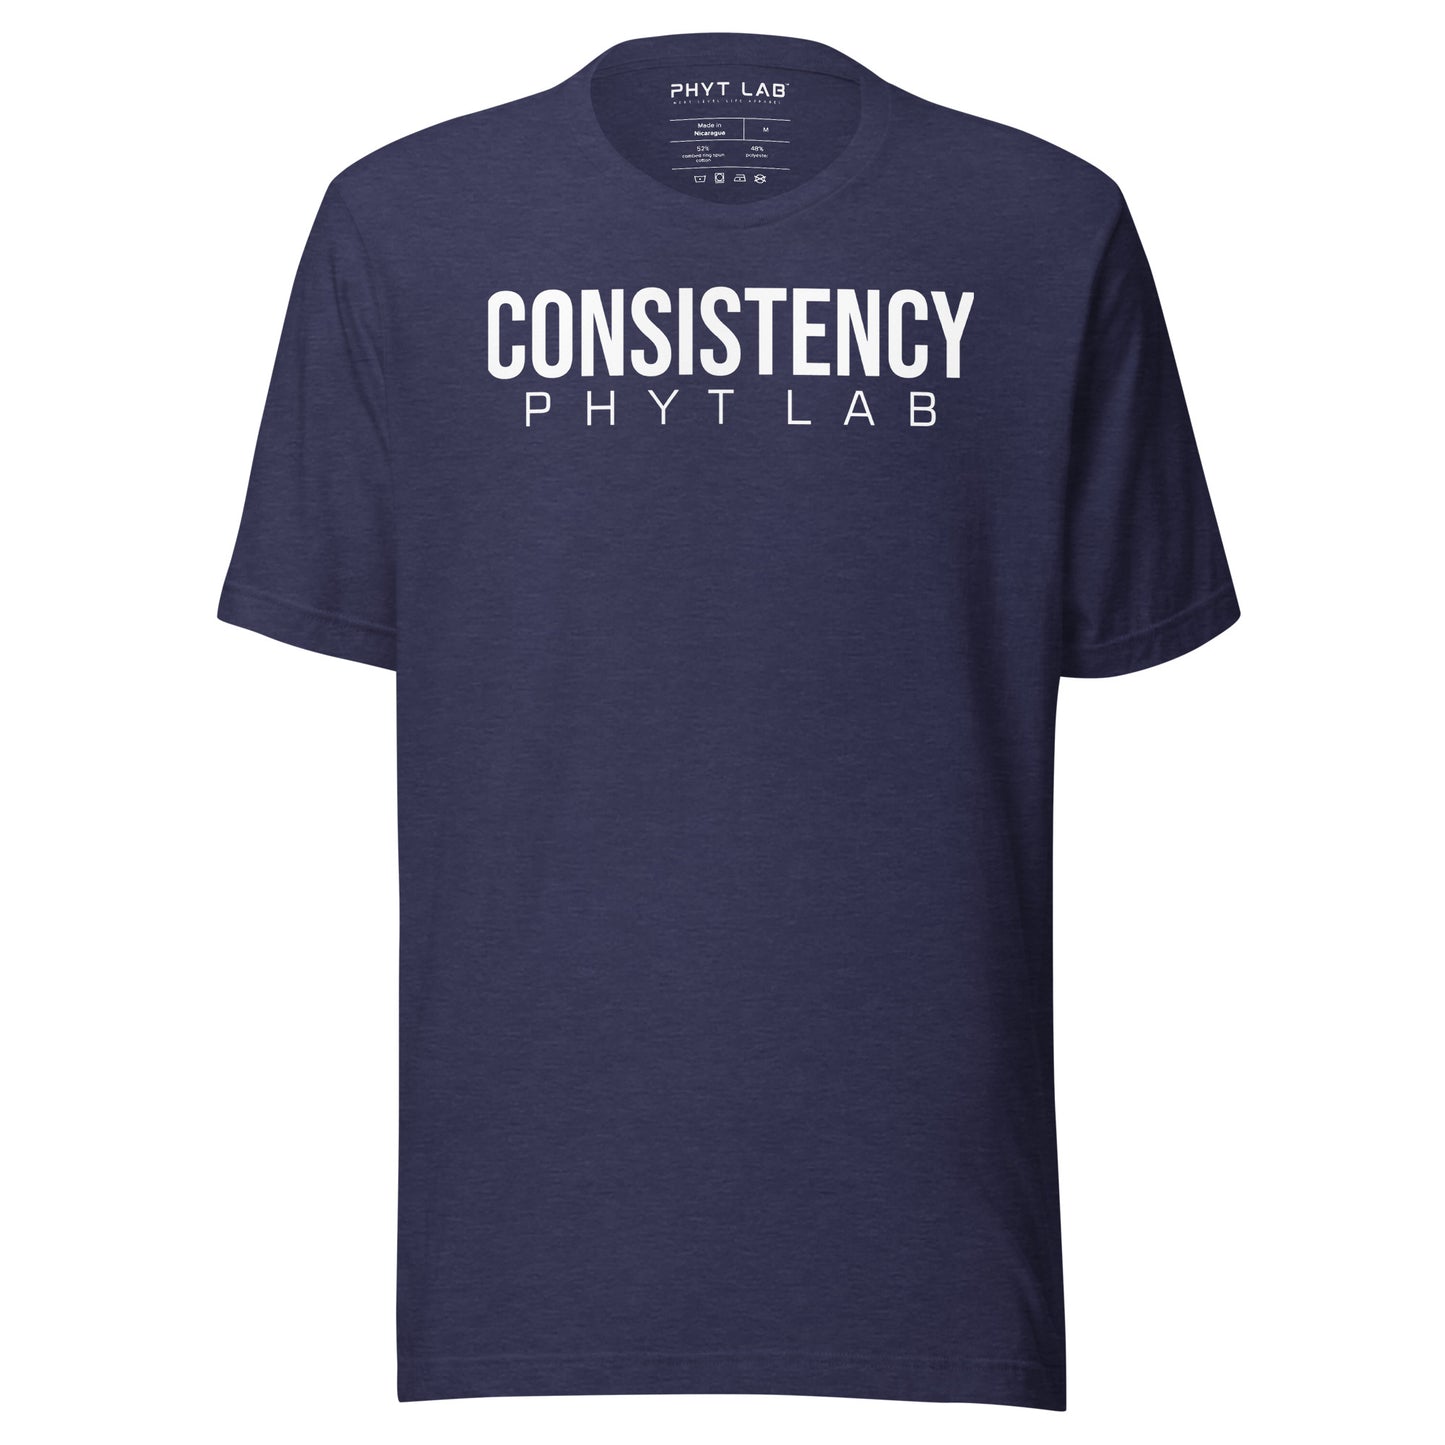 Consistency Statement T-Shirt (NEW Colors)